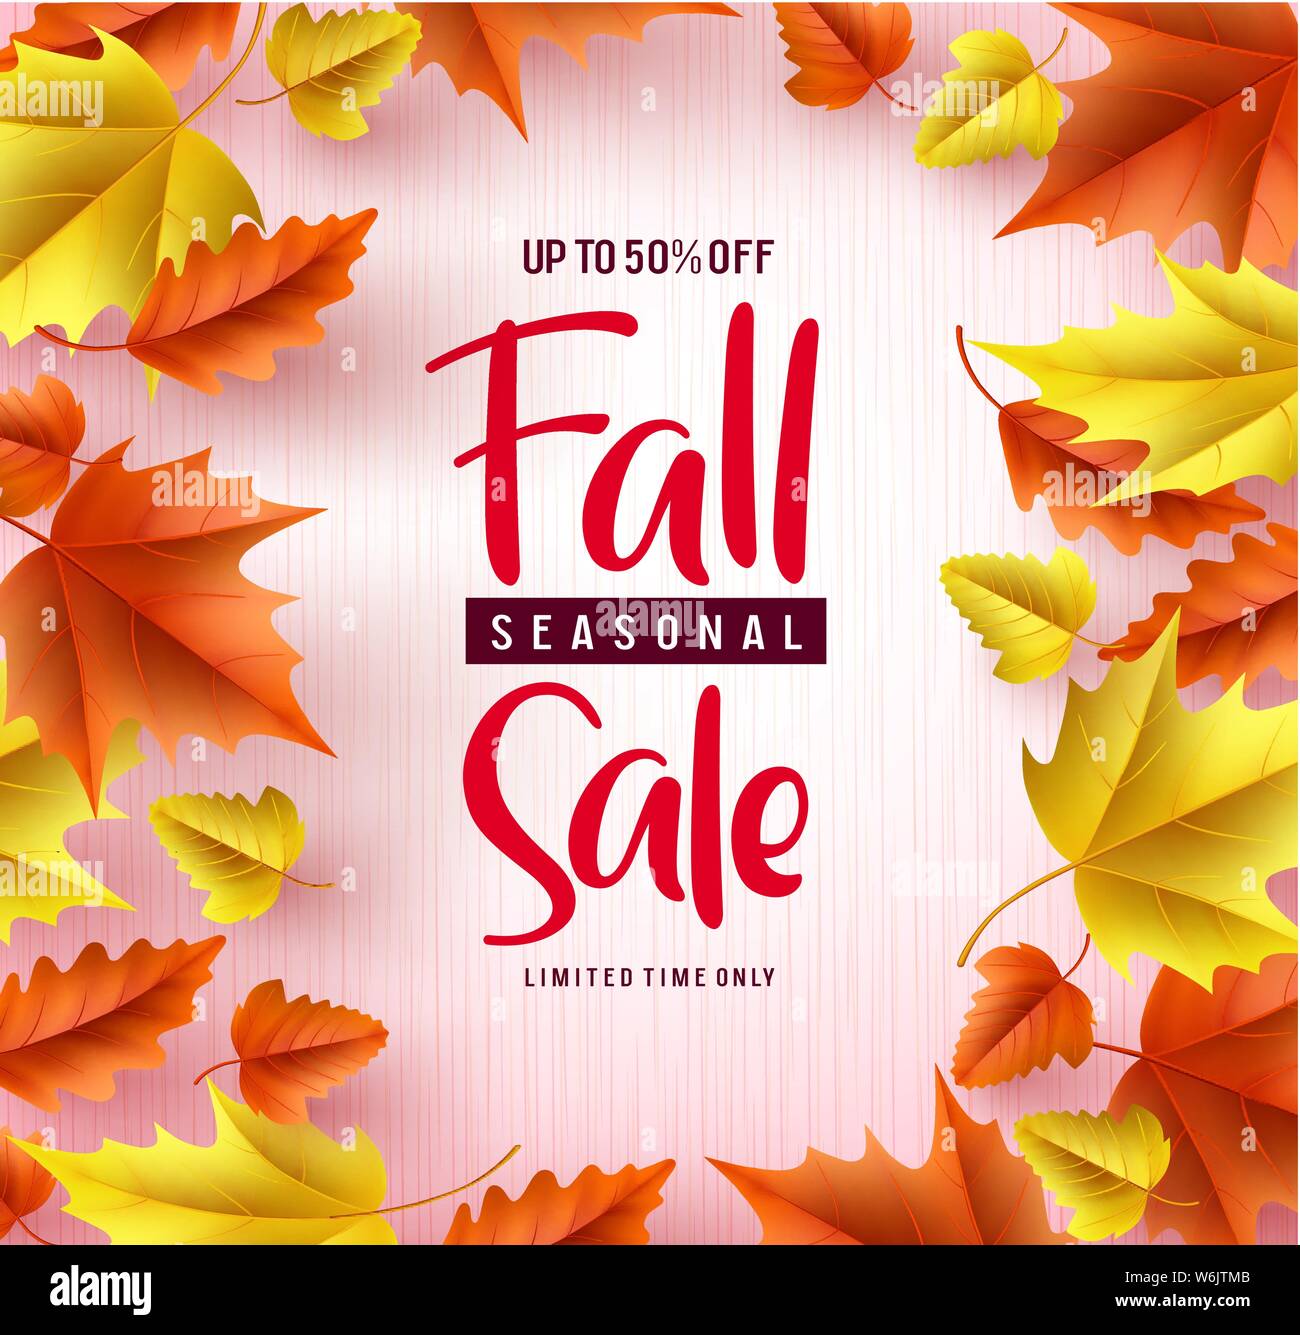 Fall season sale vector banner background. Fall seasonal sale text with colorful maple and oak leaves border in white textured background Stock Vector